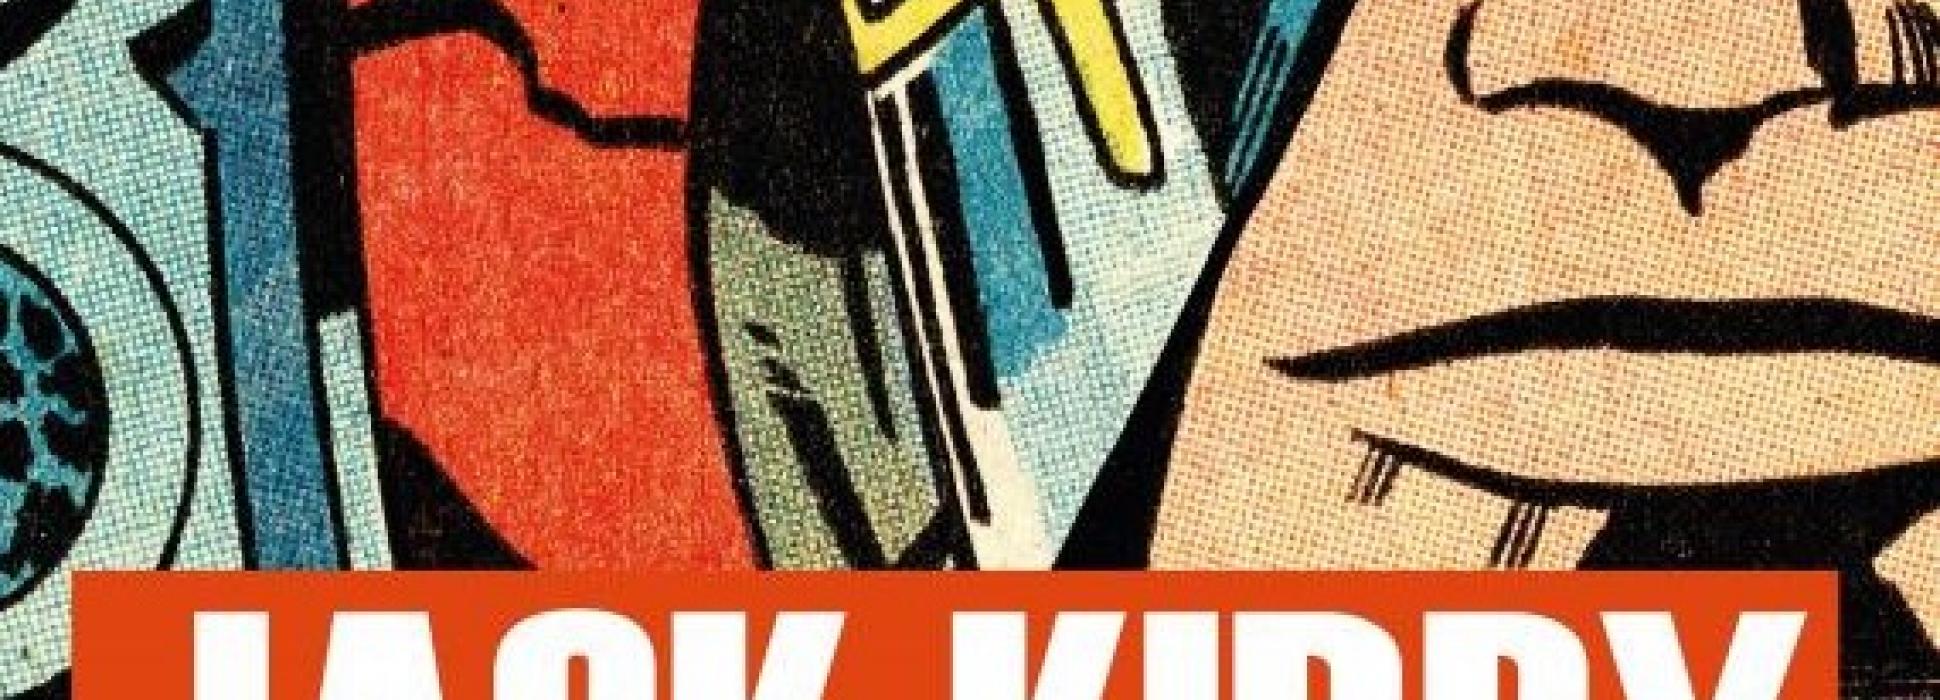 From May 25 to September 1, 2019, Cherbourg celebrates the American designer Jack Kirby for its 9th biennale of the 9th art